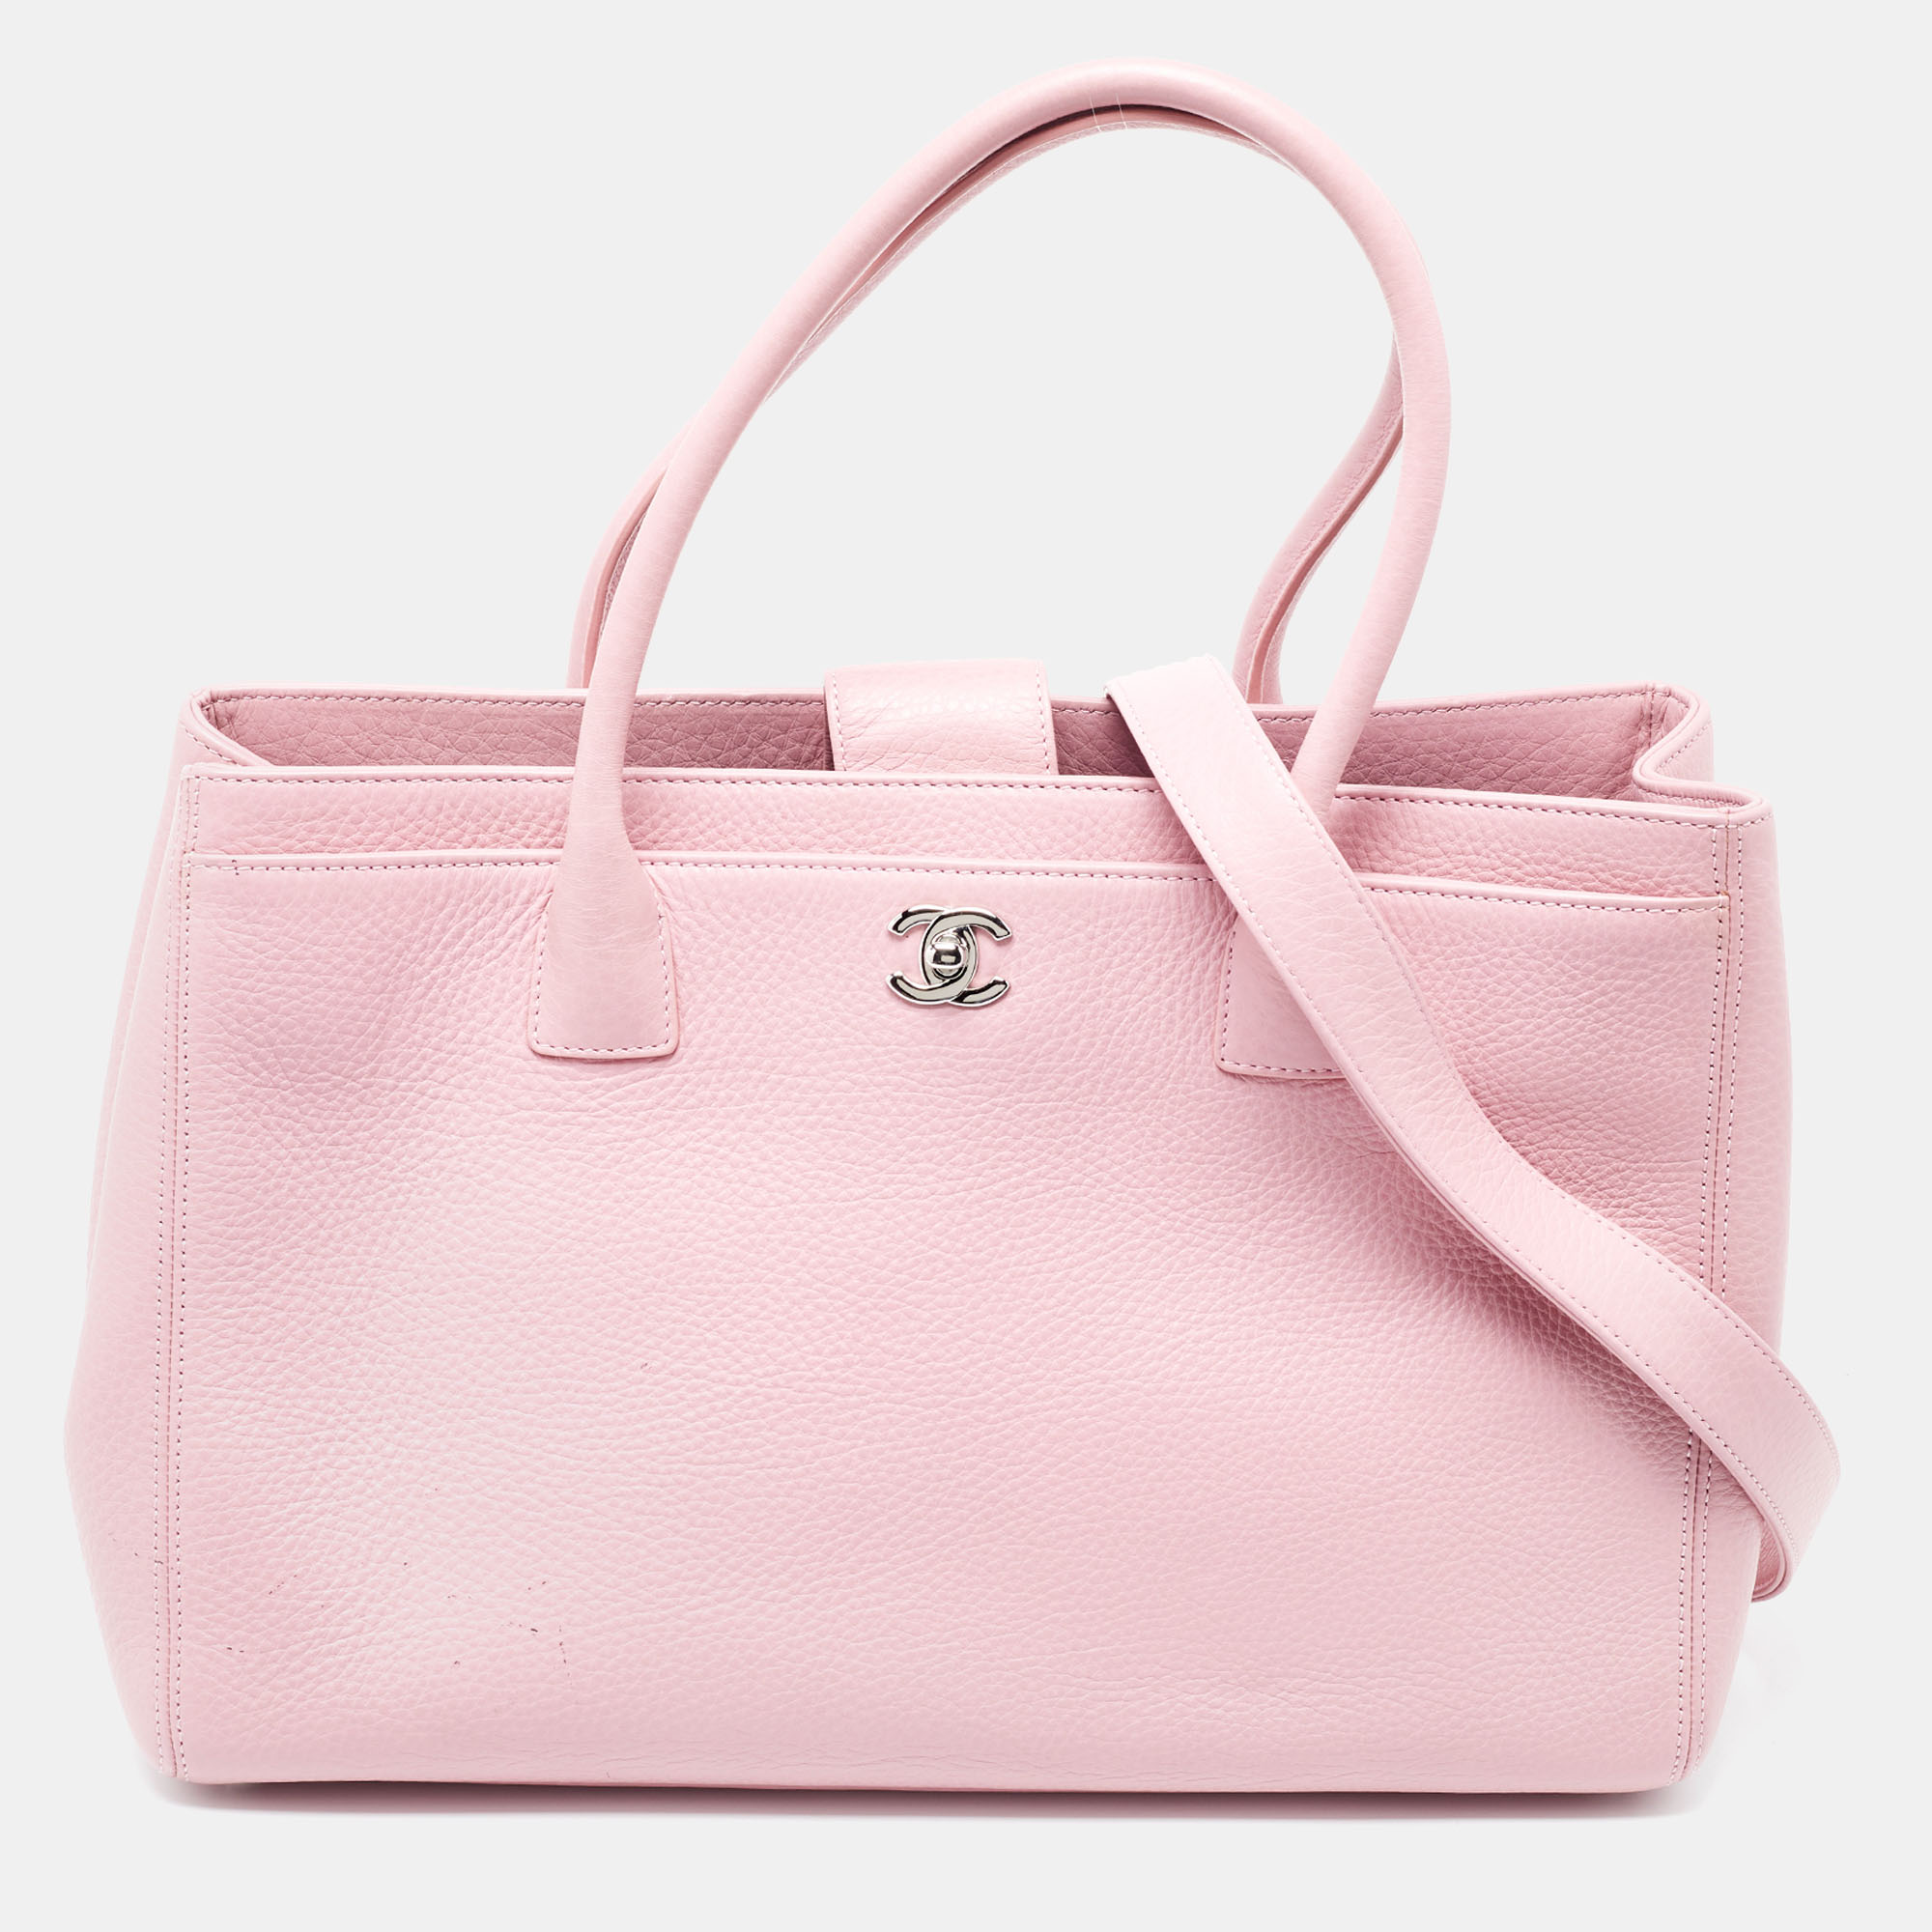 Chanel pink leather executive cerf tote